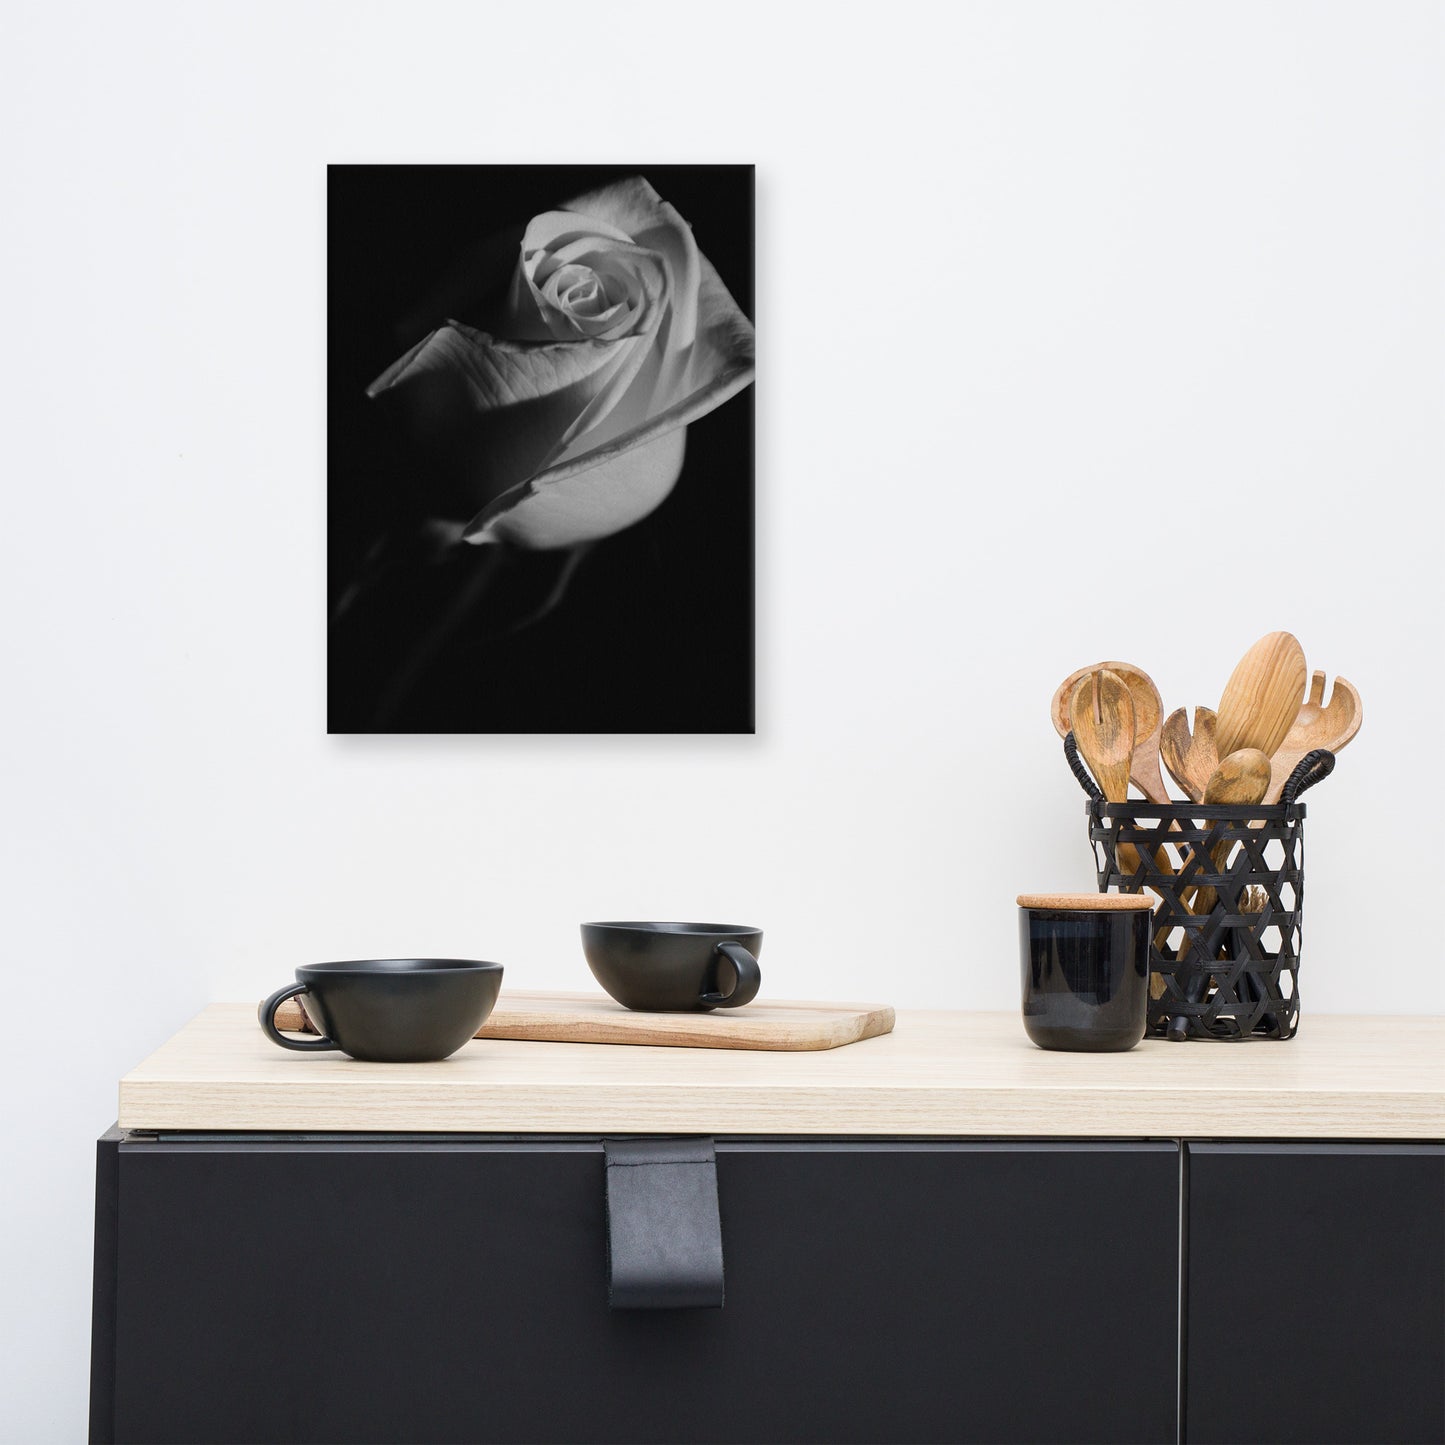 Rose on Black Black and White Floral Nature Canvas Wall Art Prints